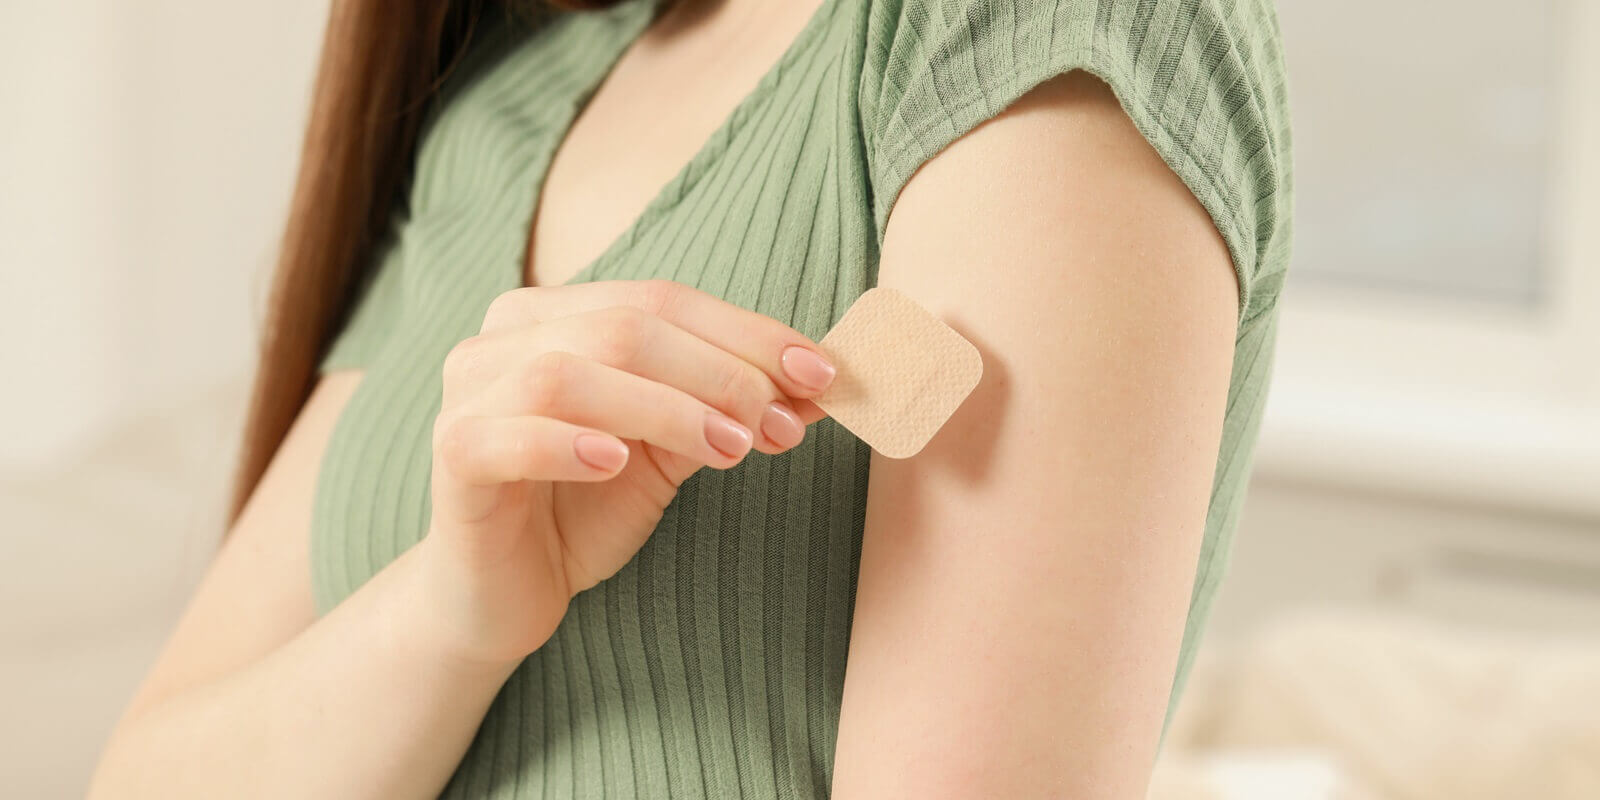 NC woman applying contraceptive patch onto her arm indoors